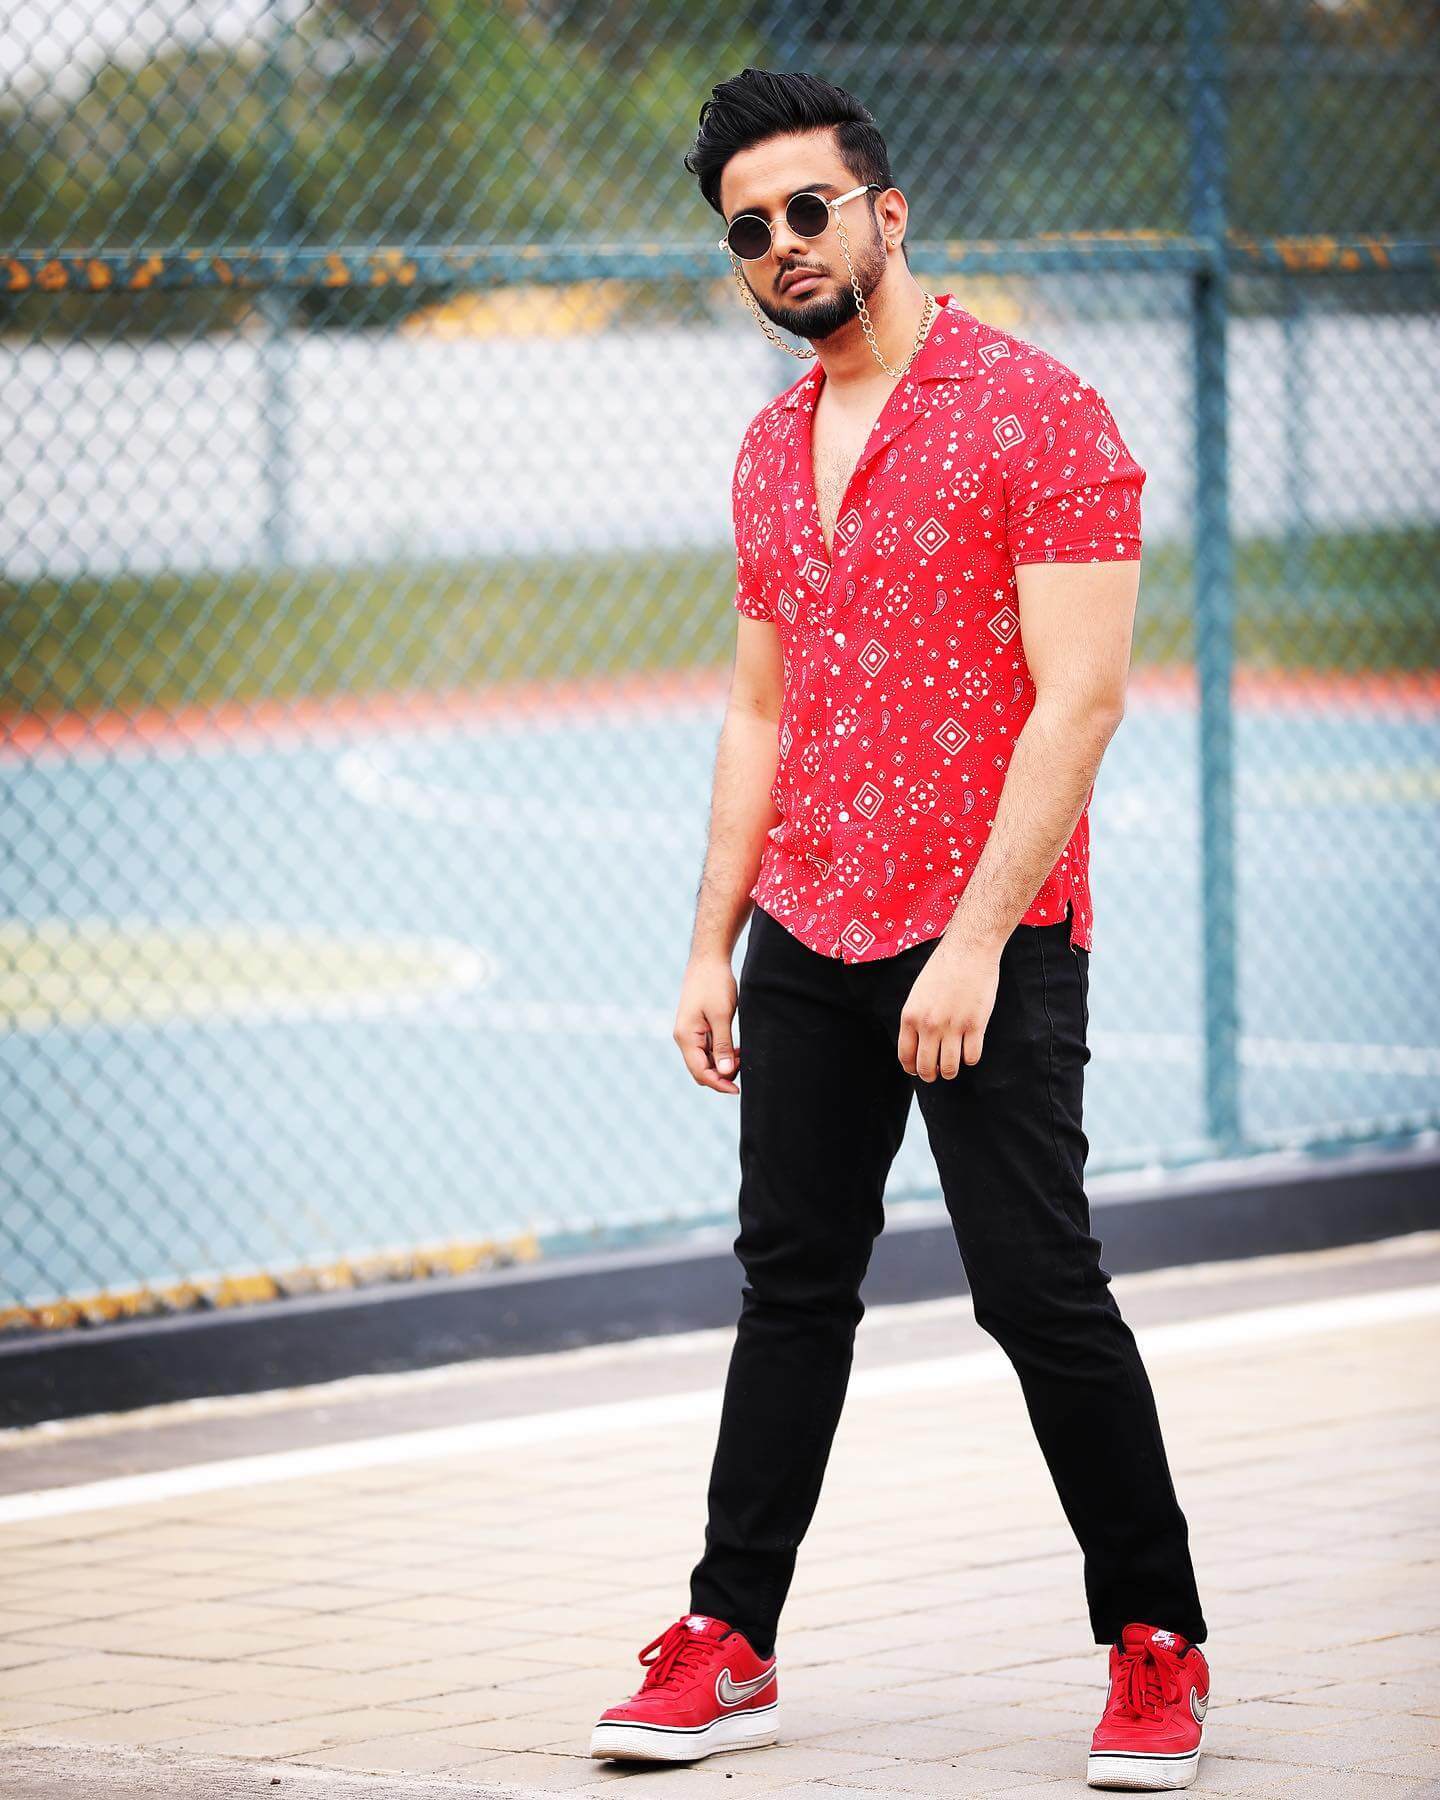 Actor Likith Shetty stylish look in red shirt